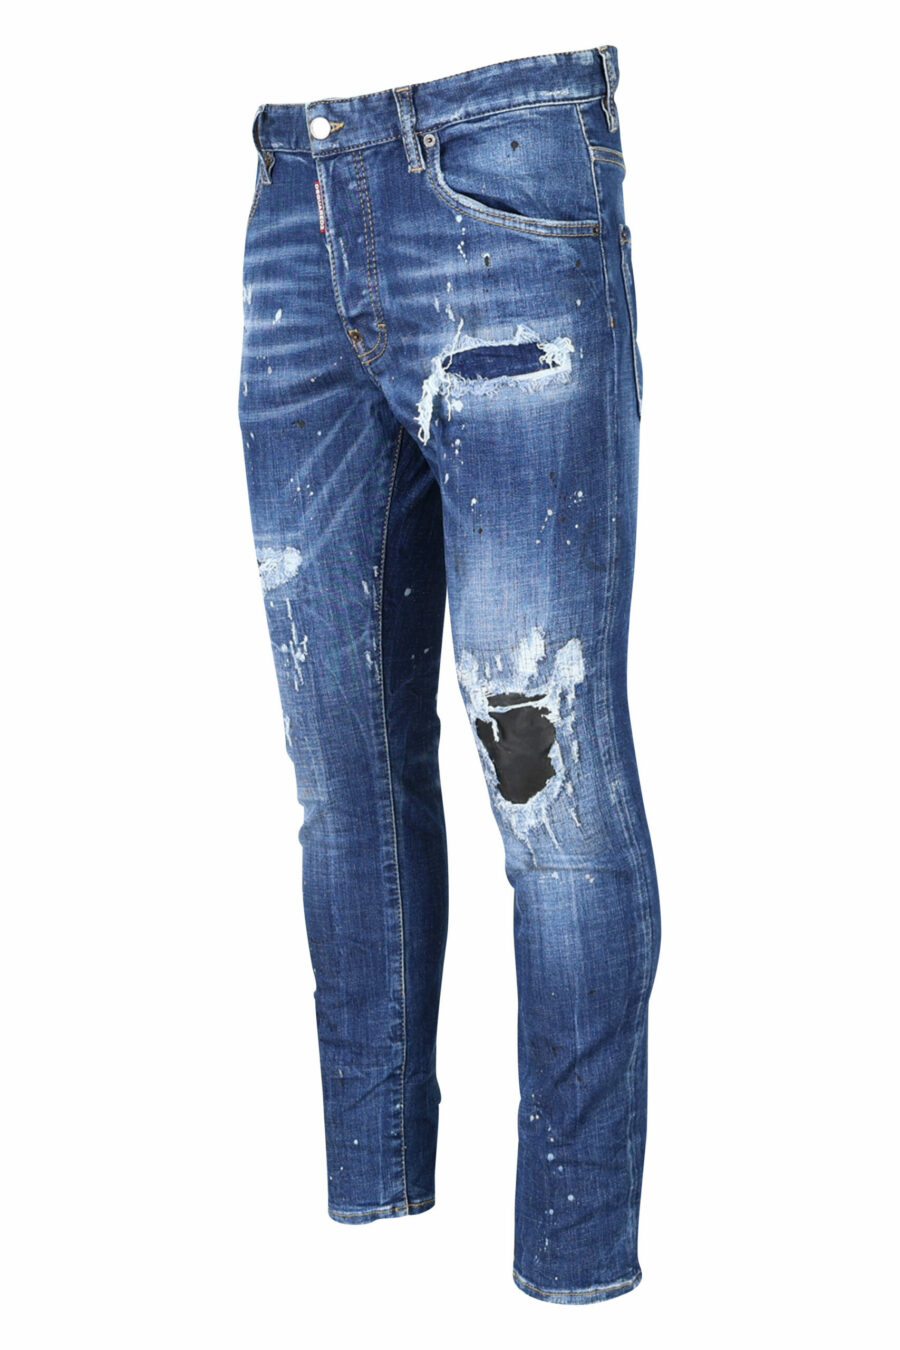 Jeans "super twinkey jean" blue frayed with black ripped - 8054148124328 1 scaled